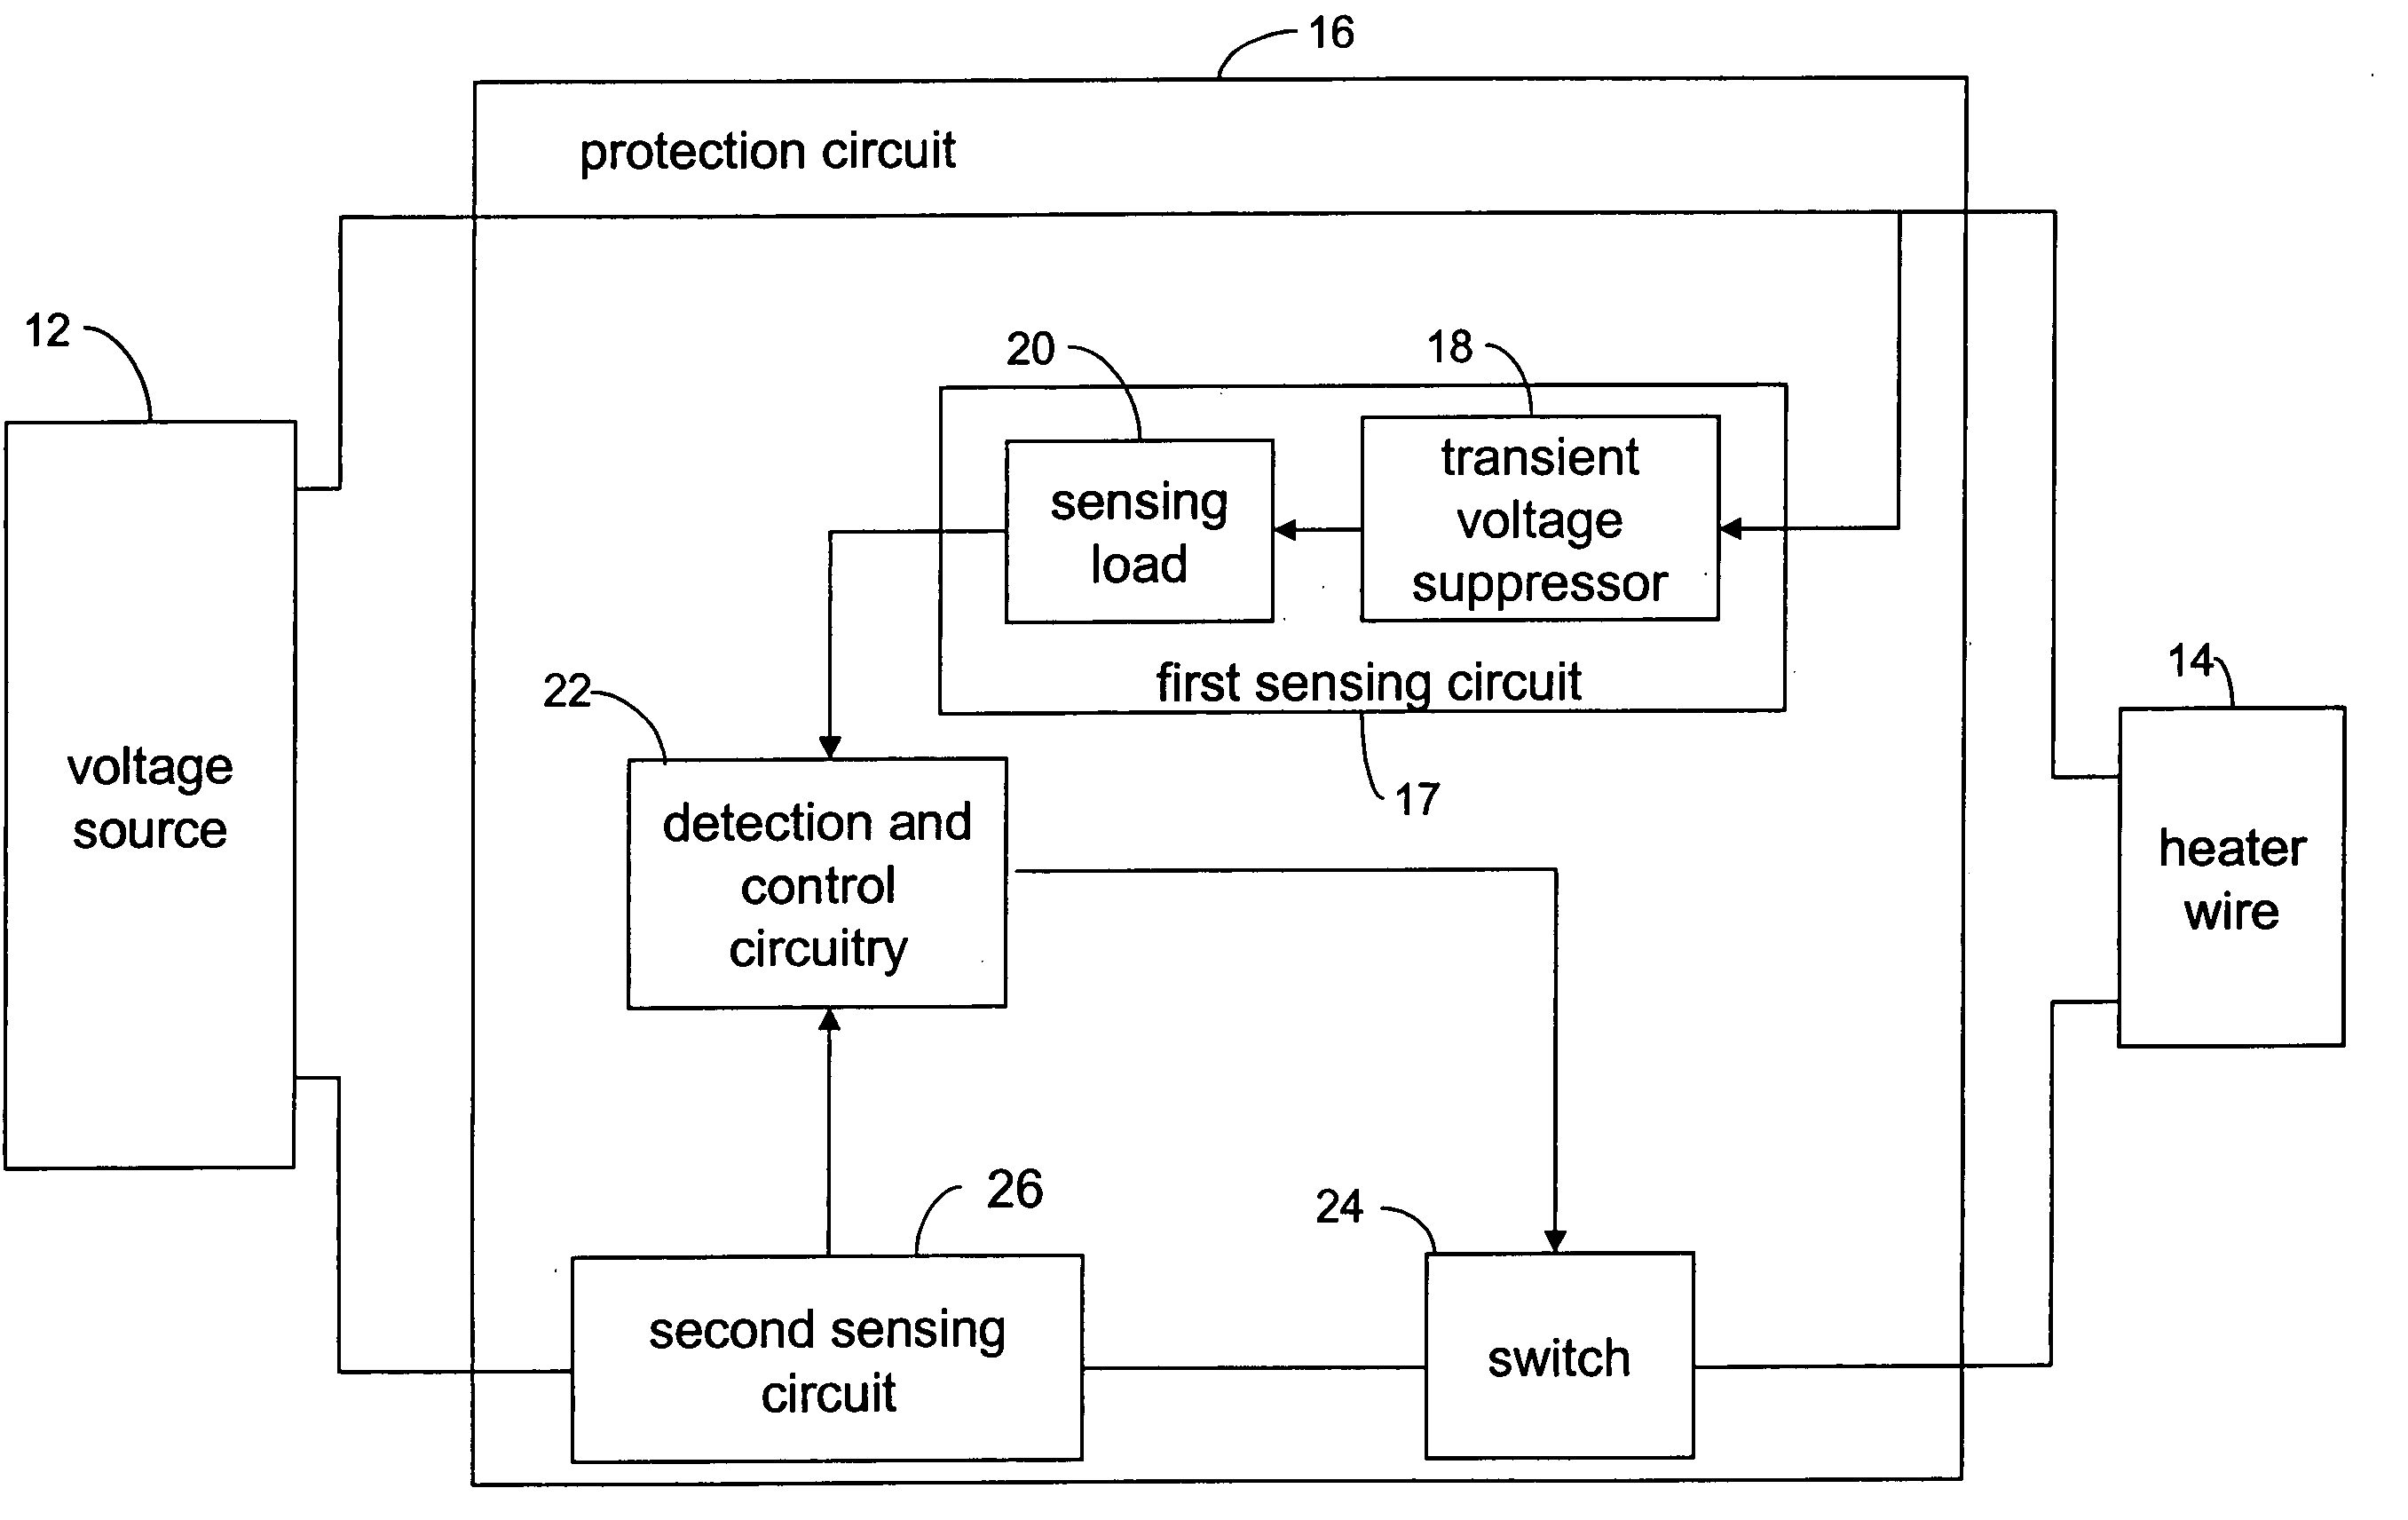 Electrical arcing protection circuit